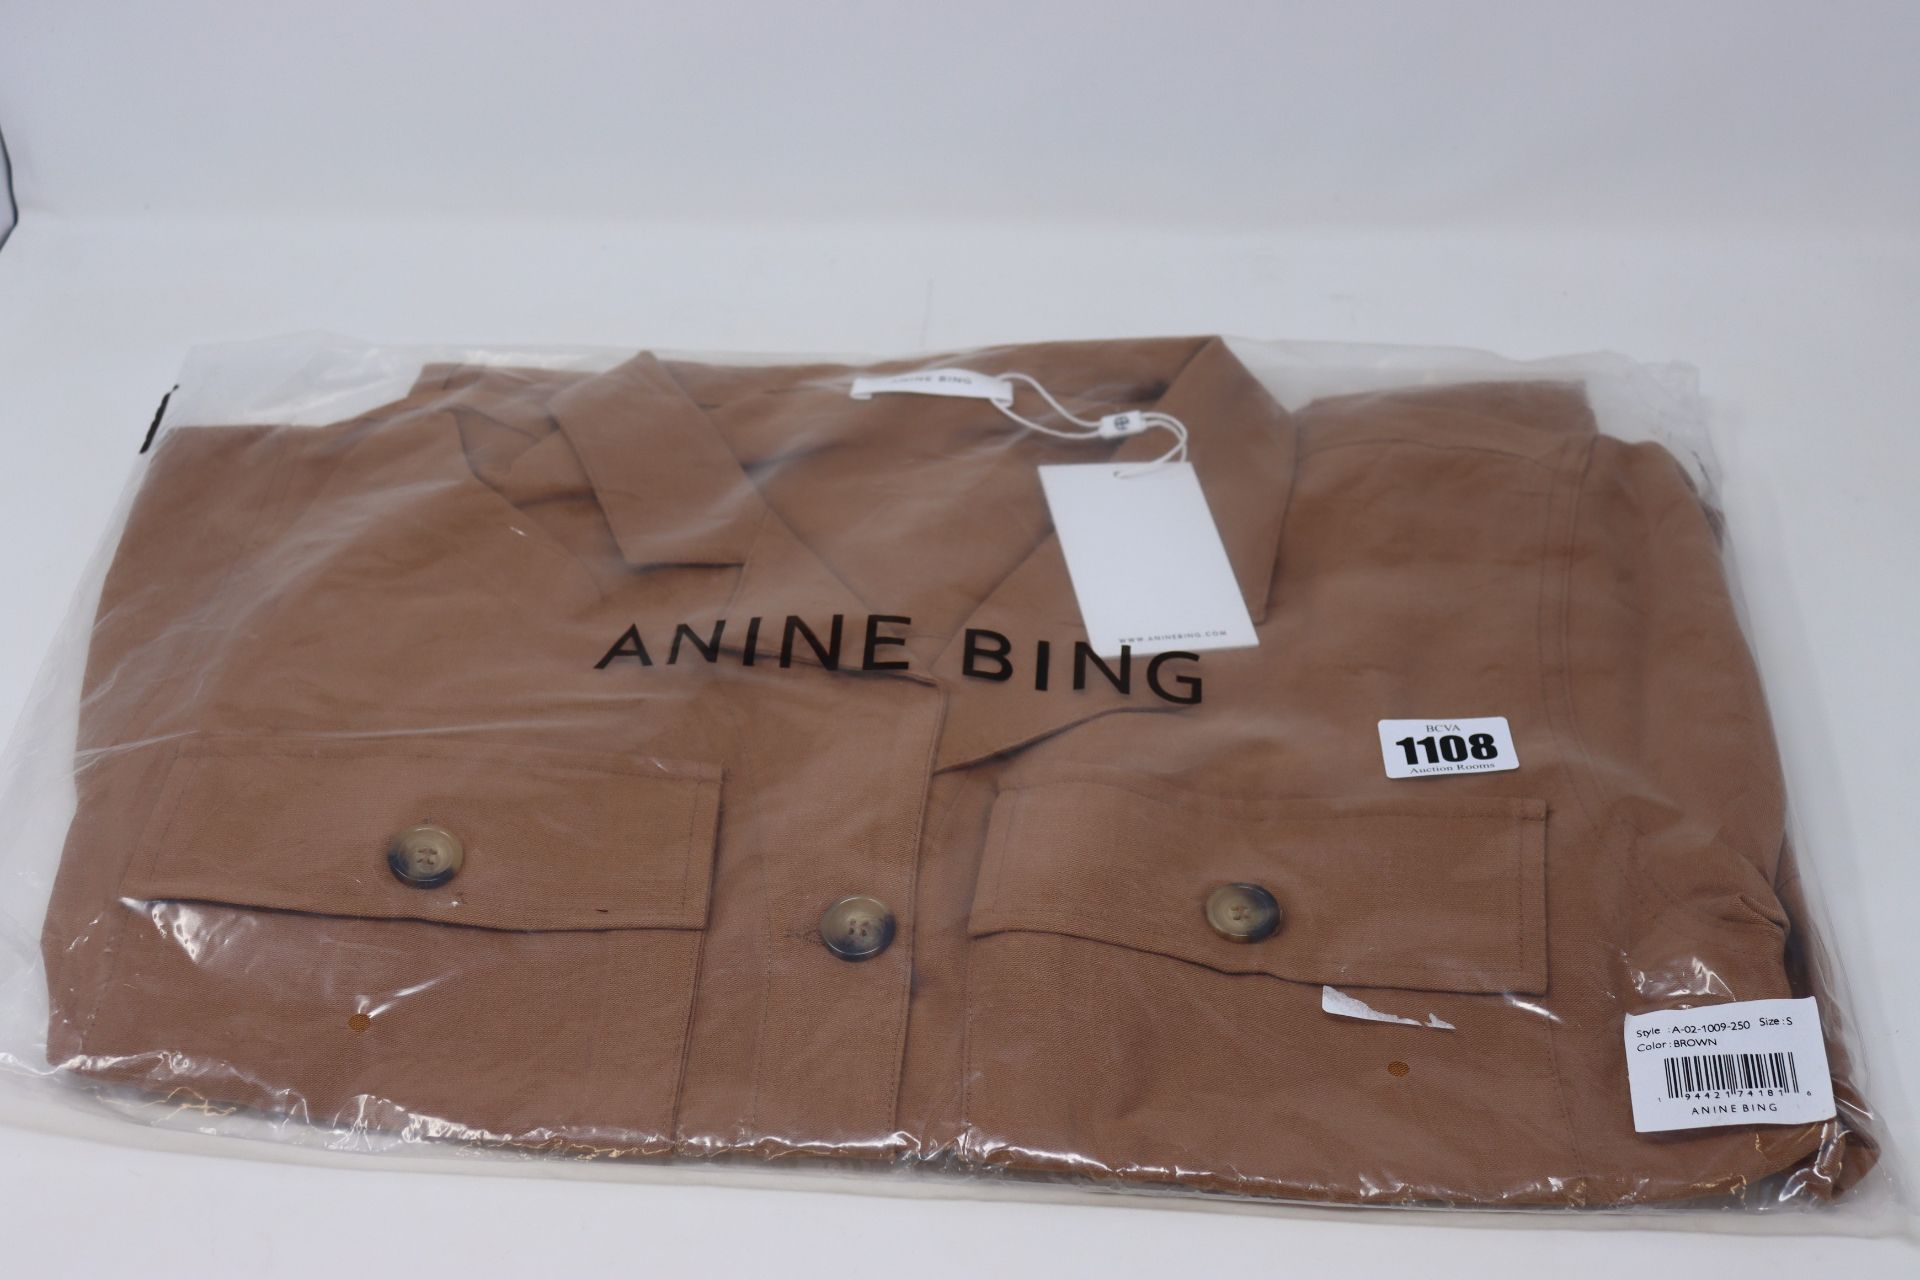 One as new Anine Bing Kaiden Belted Utility Dress In Brown size S (A-02-1009-250).